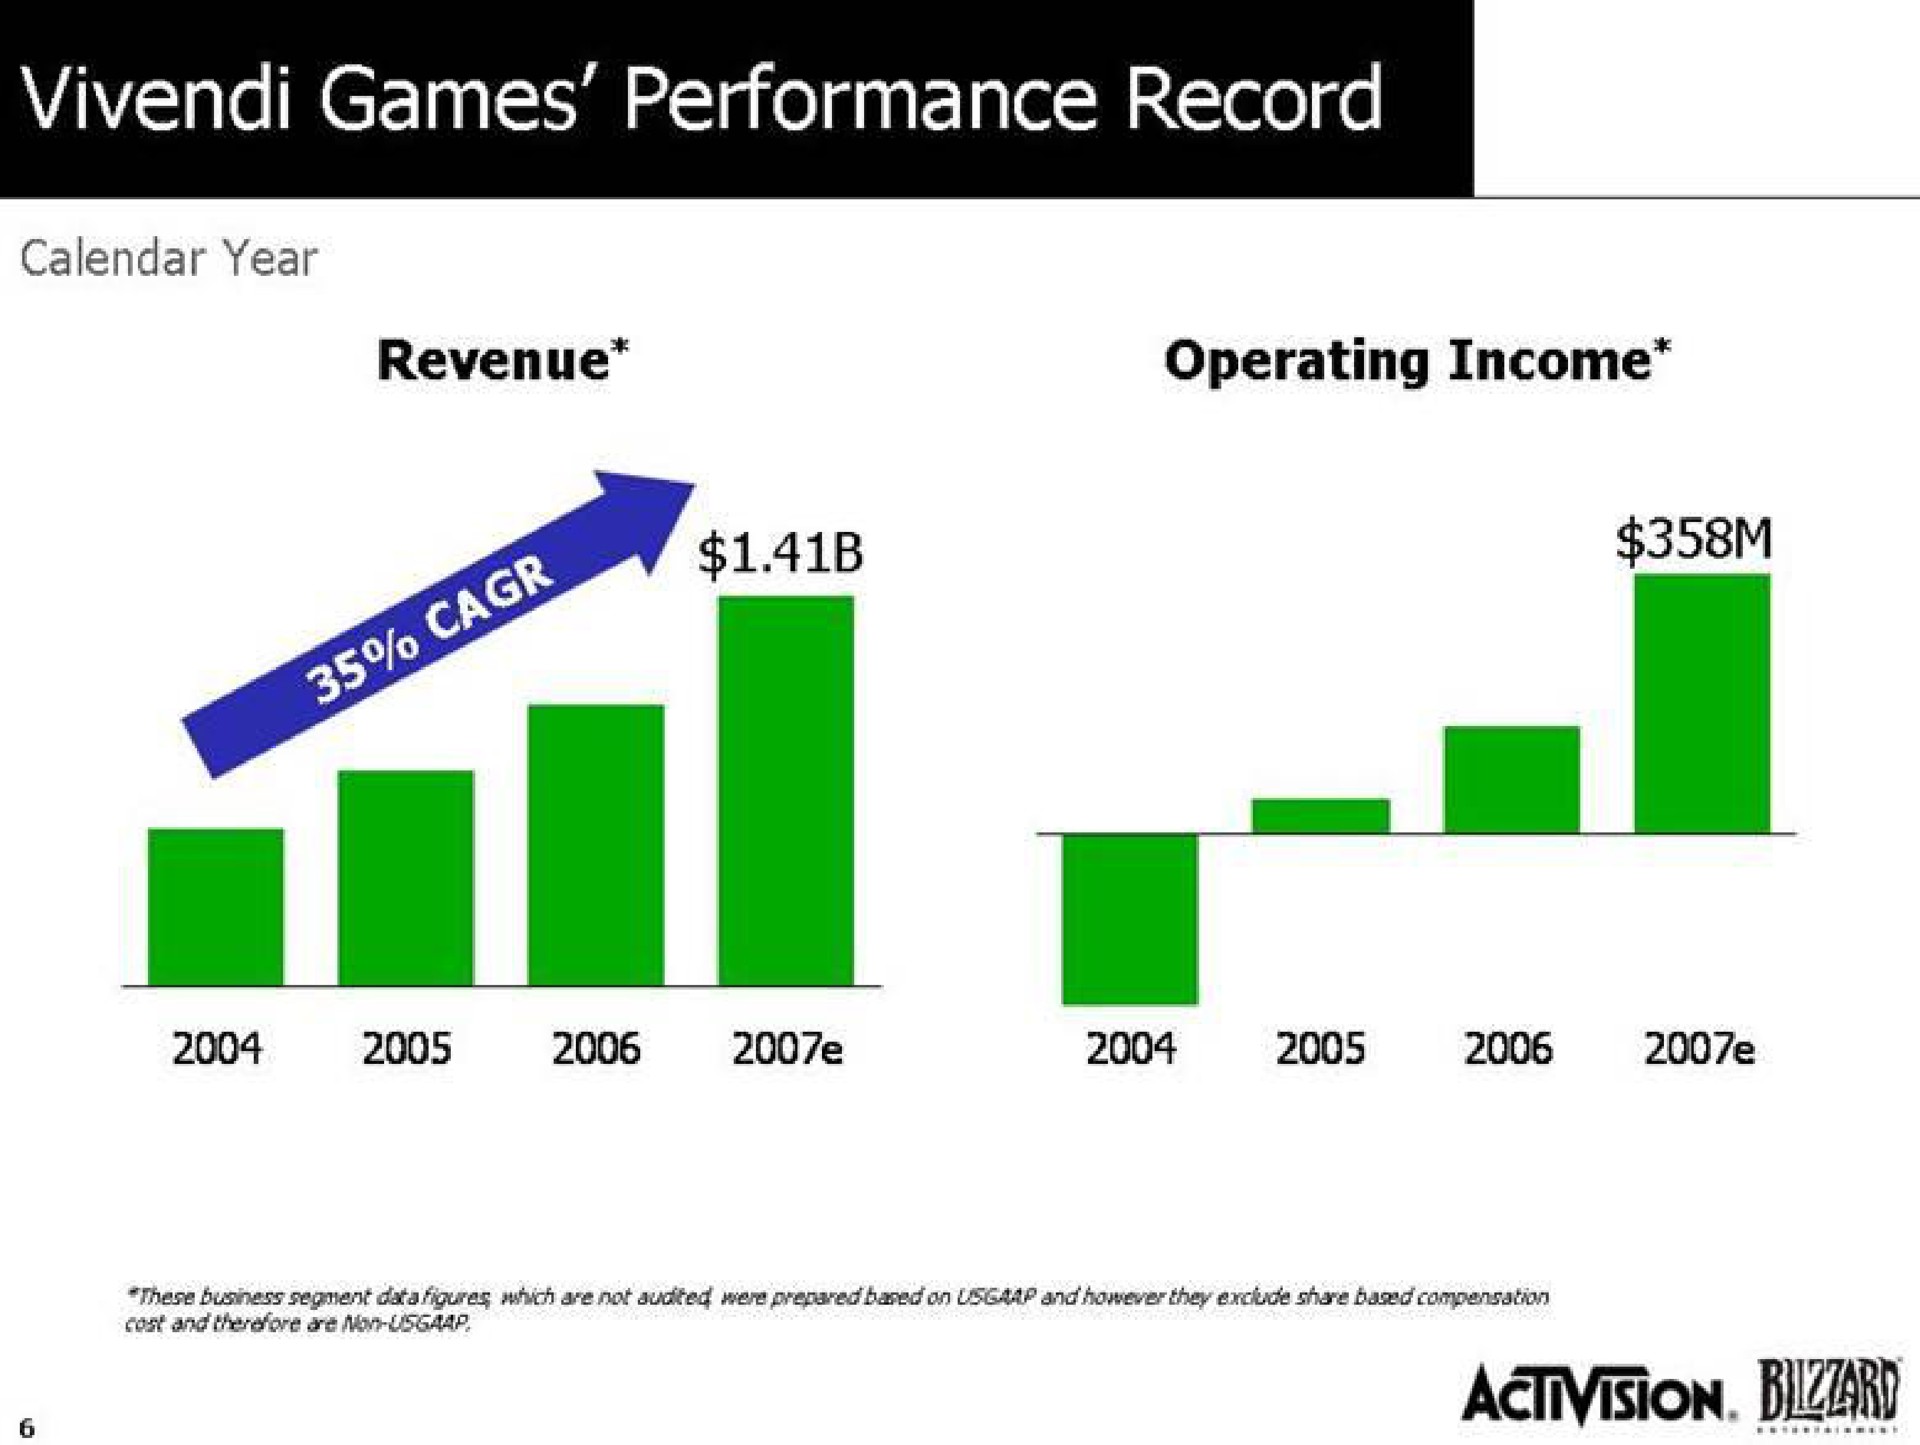 games performance record mae | Activision Blizzard